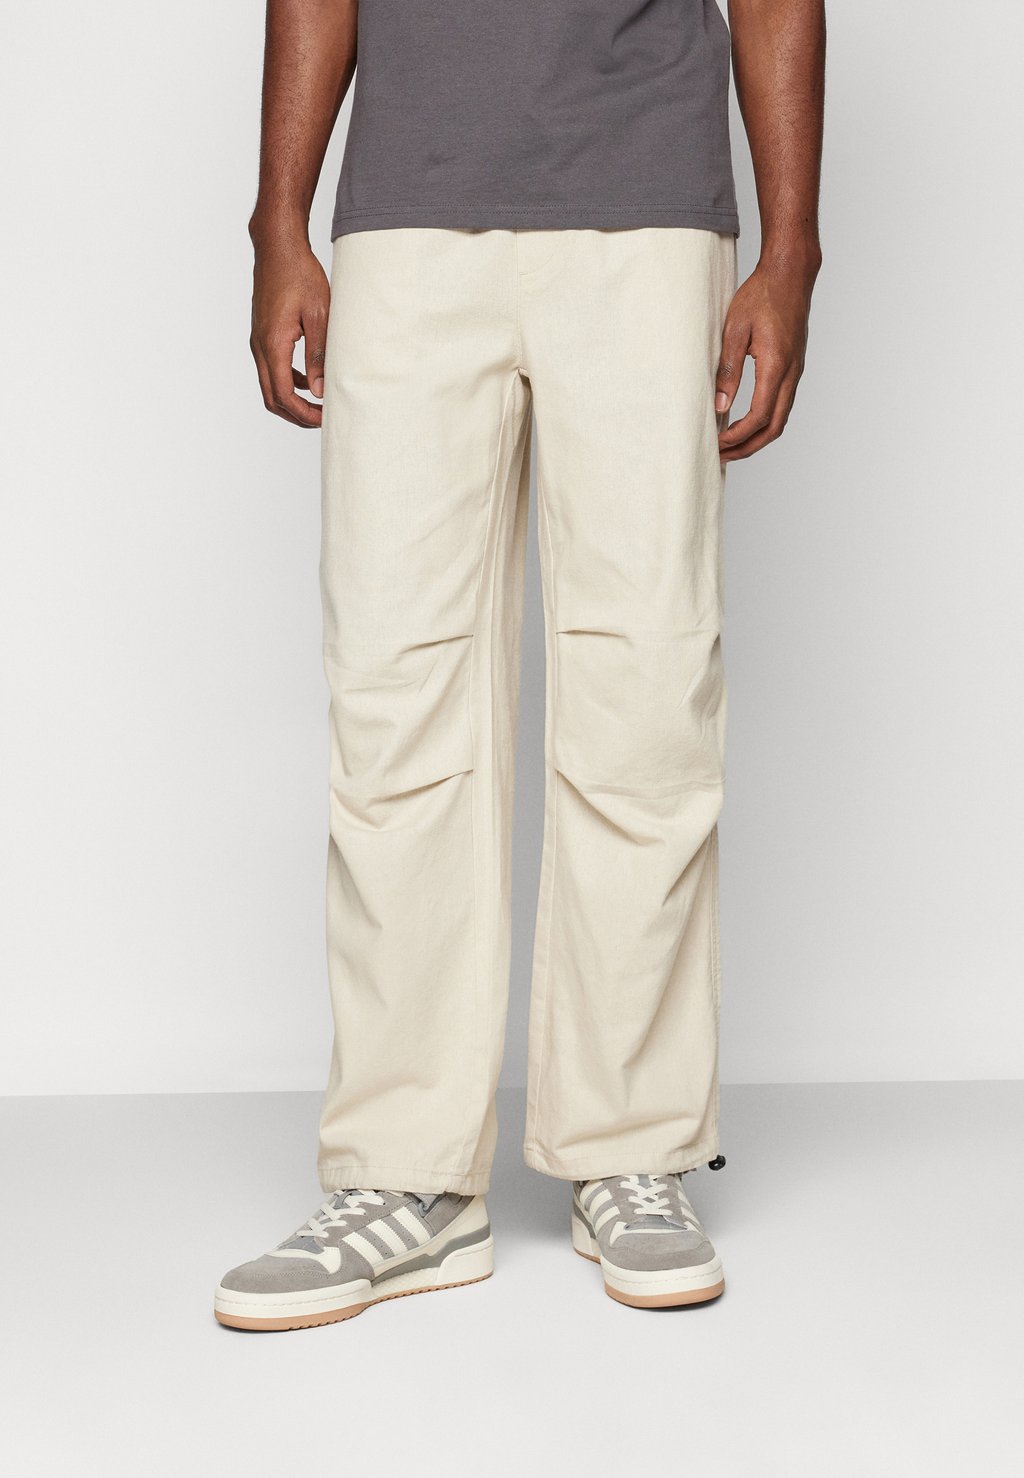 Брюки ONSFRED LOOSE PANT Only & Sons, земля брюки карго onsfred loose only